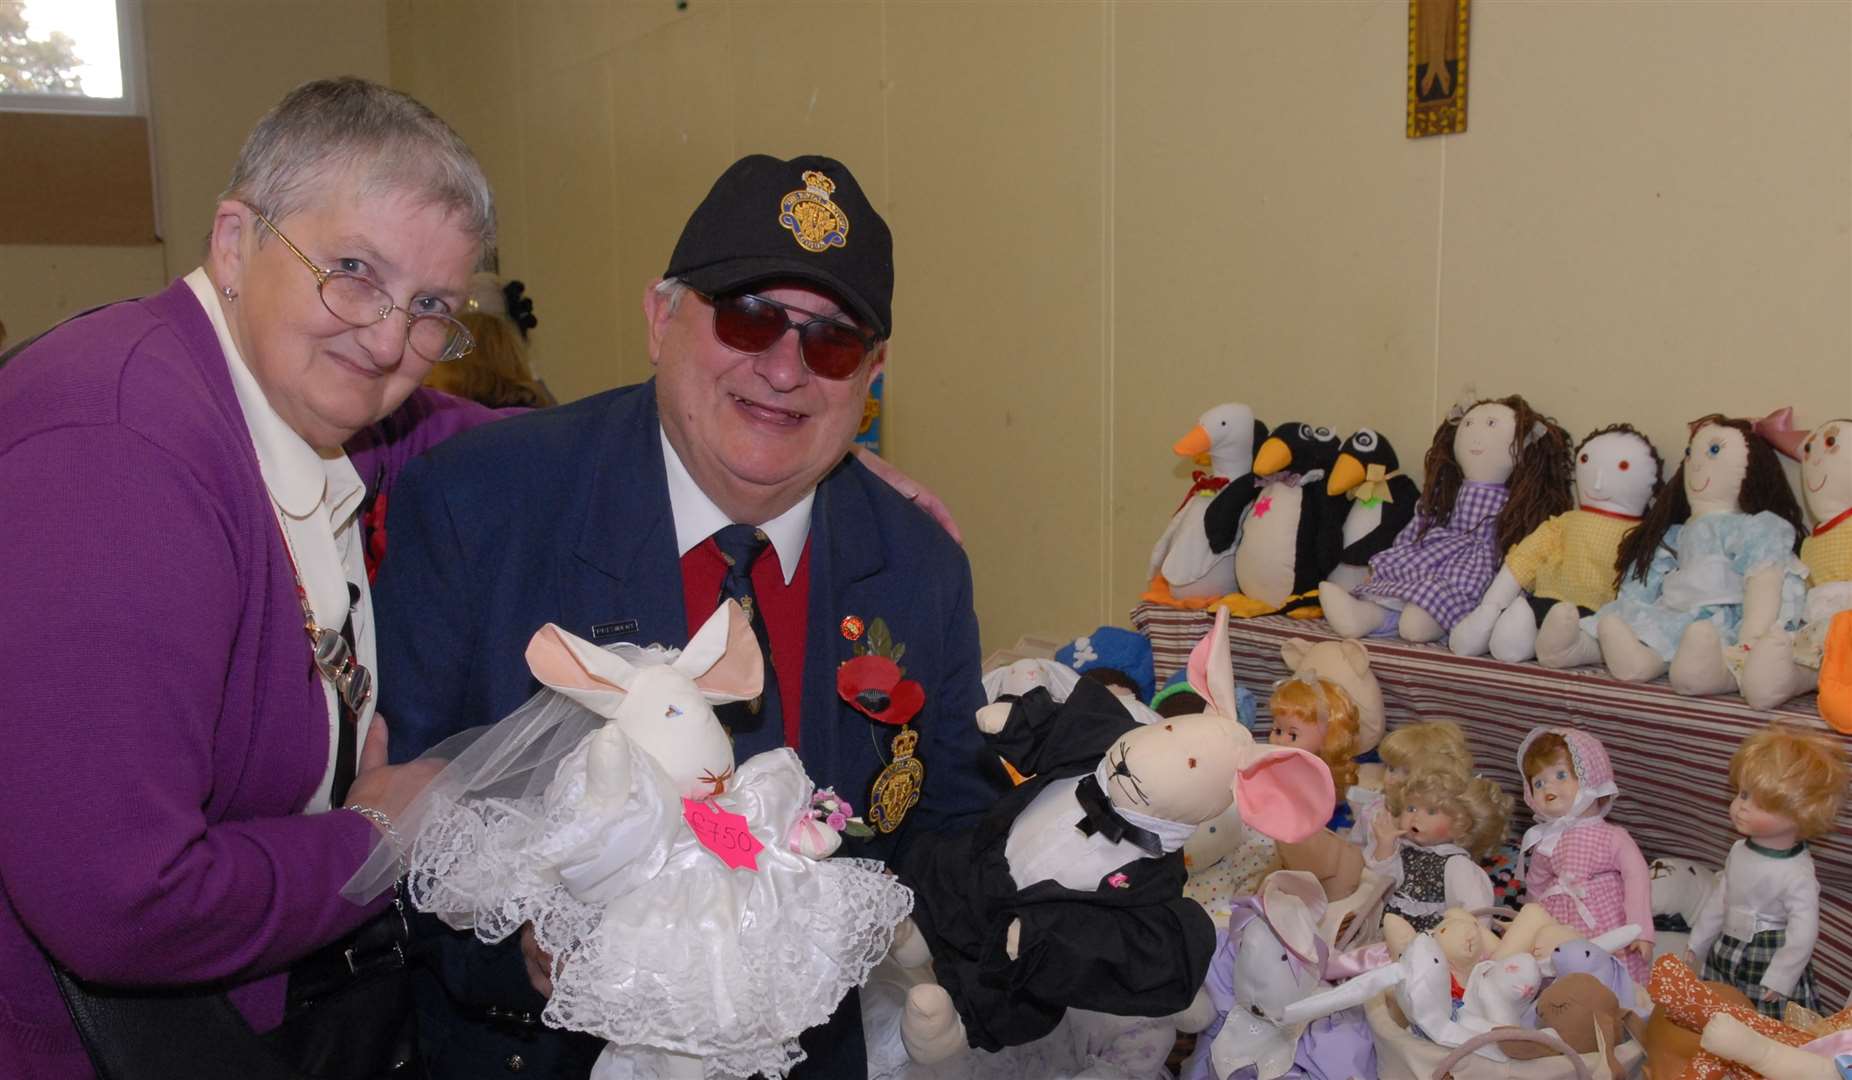 John Friday, who was president of the Sheppey branch of the Royal British Legion, pictured in 2007 helping out Valerie Sands on a soft toy stall at a coffee morning